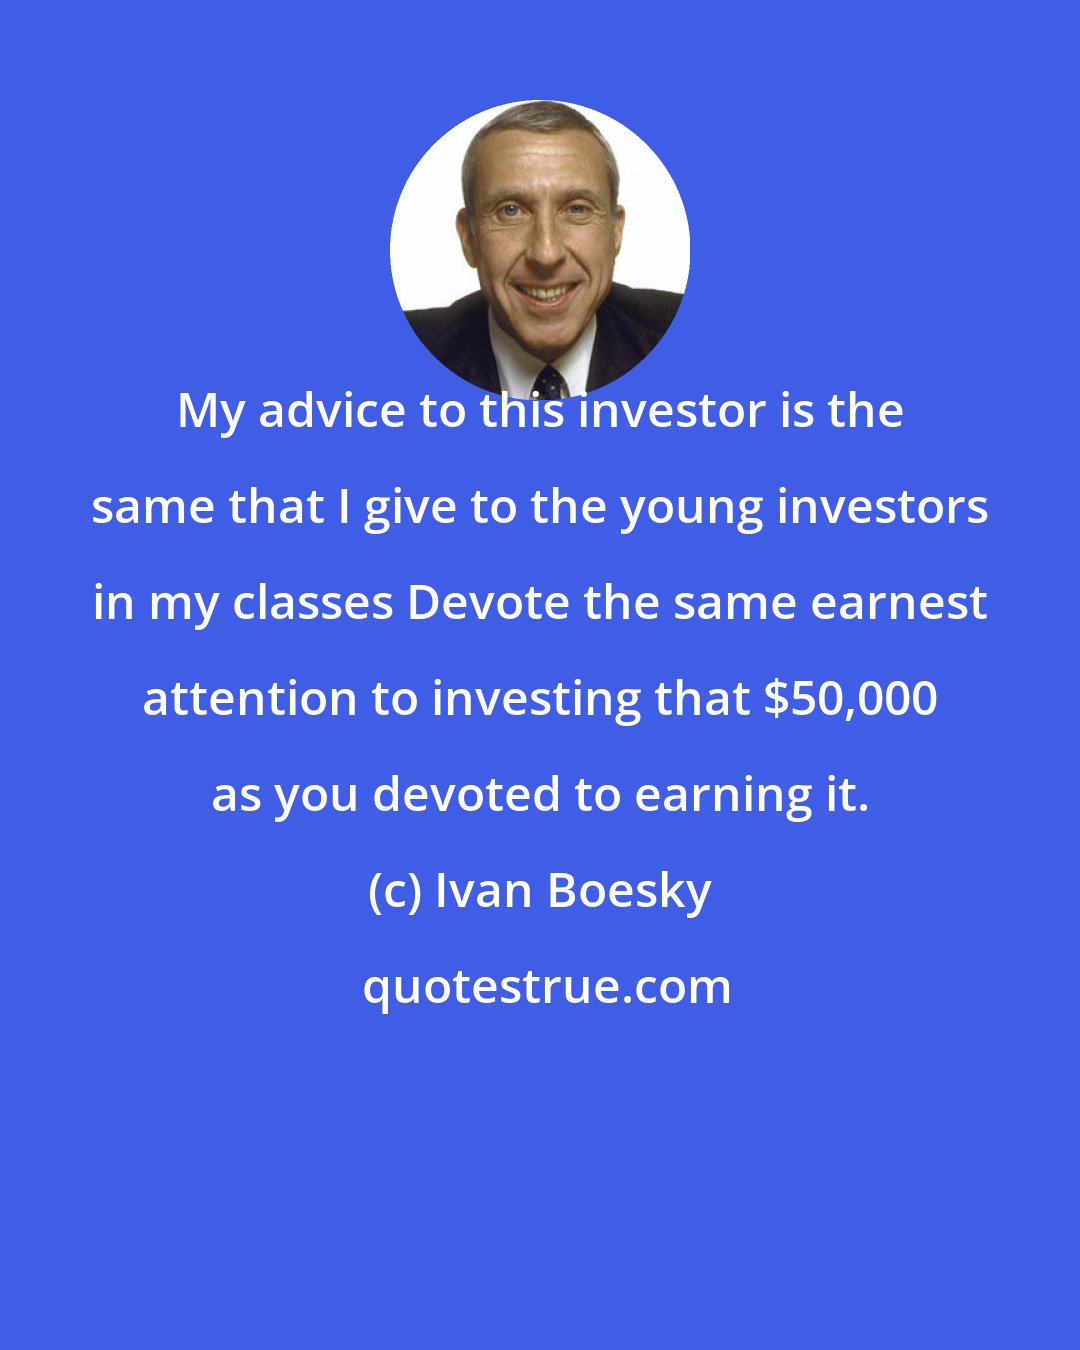 Ivan Boesky: My advice to this investor is the same that I give to the young investors in my classes Devote the same earnest attention to investing that $50,000 as you devoted to earning it.